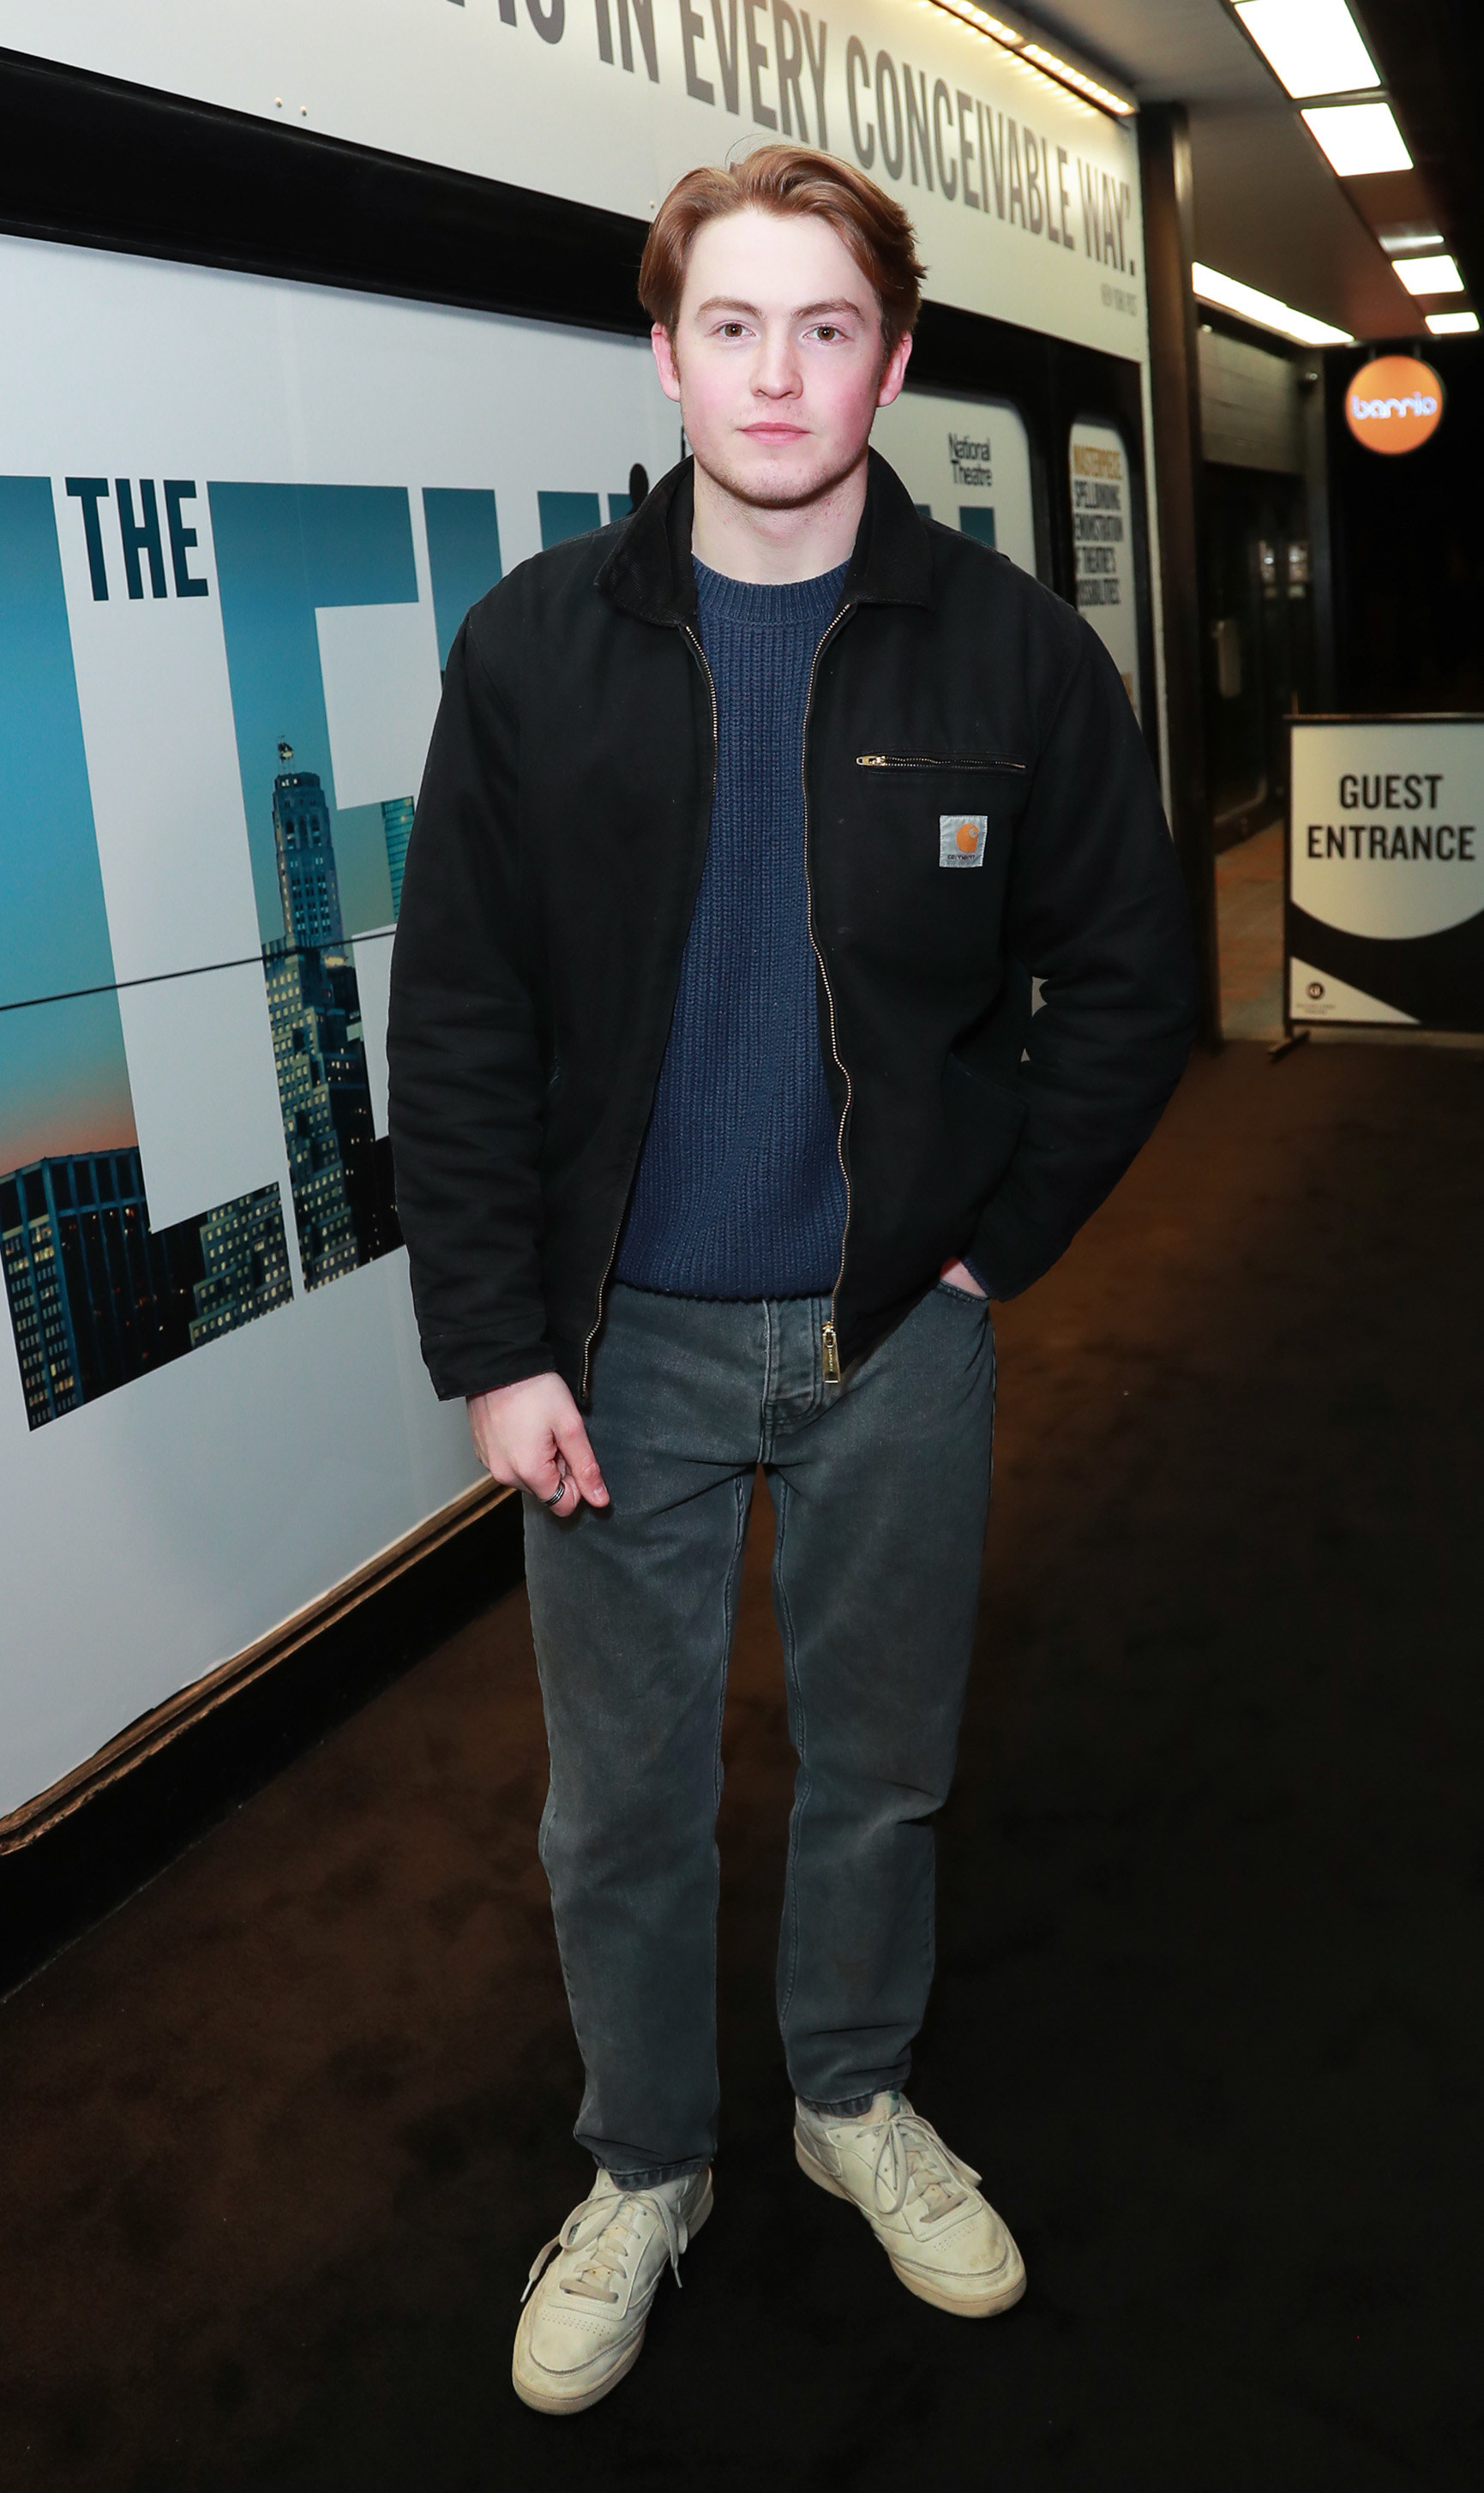 Kit is wearing jeans, a sweater, zip-up jacket, and sneakers